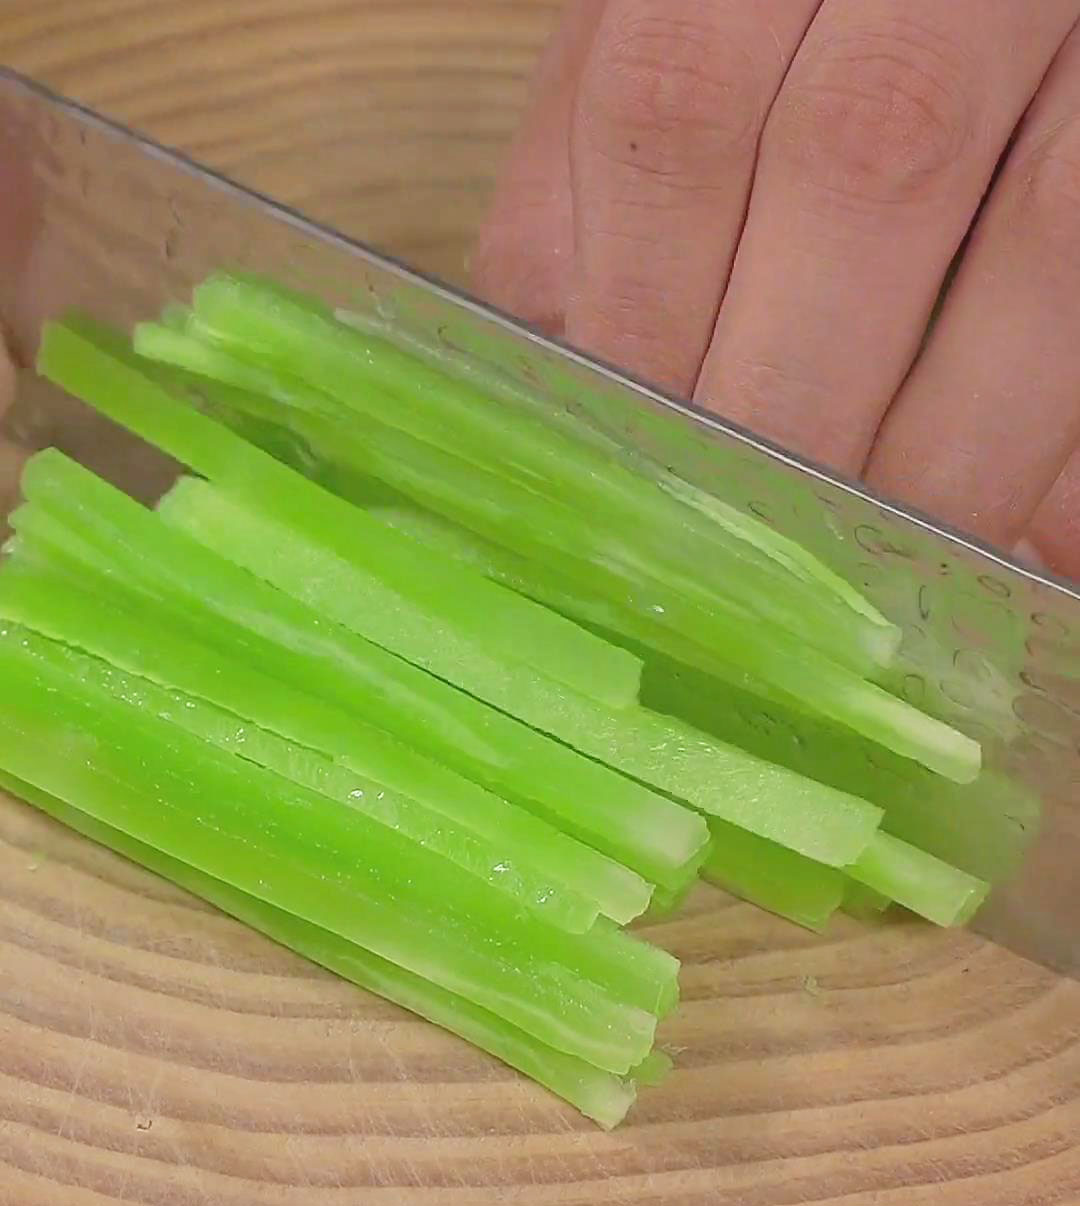 Slice the chopped stems into thin strips